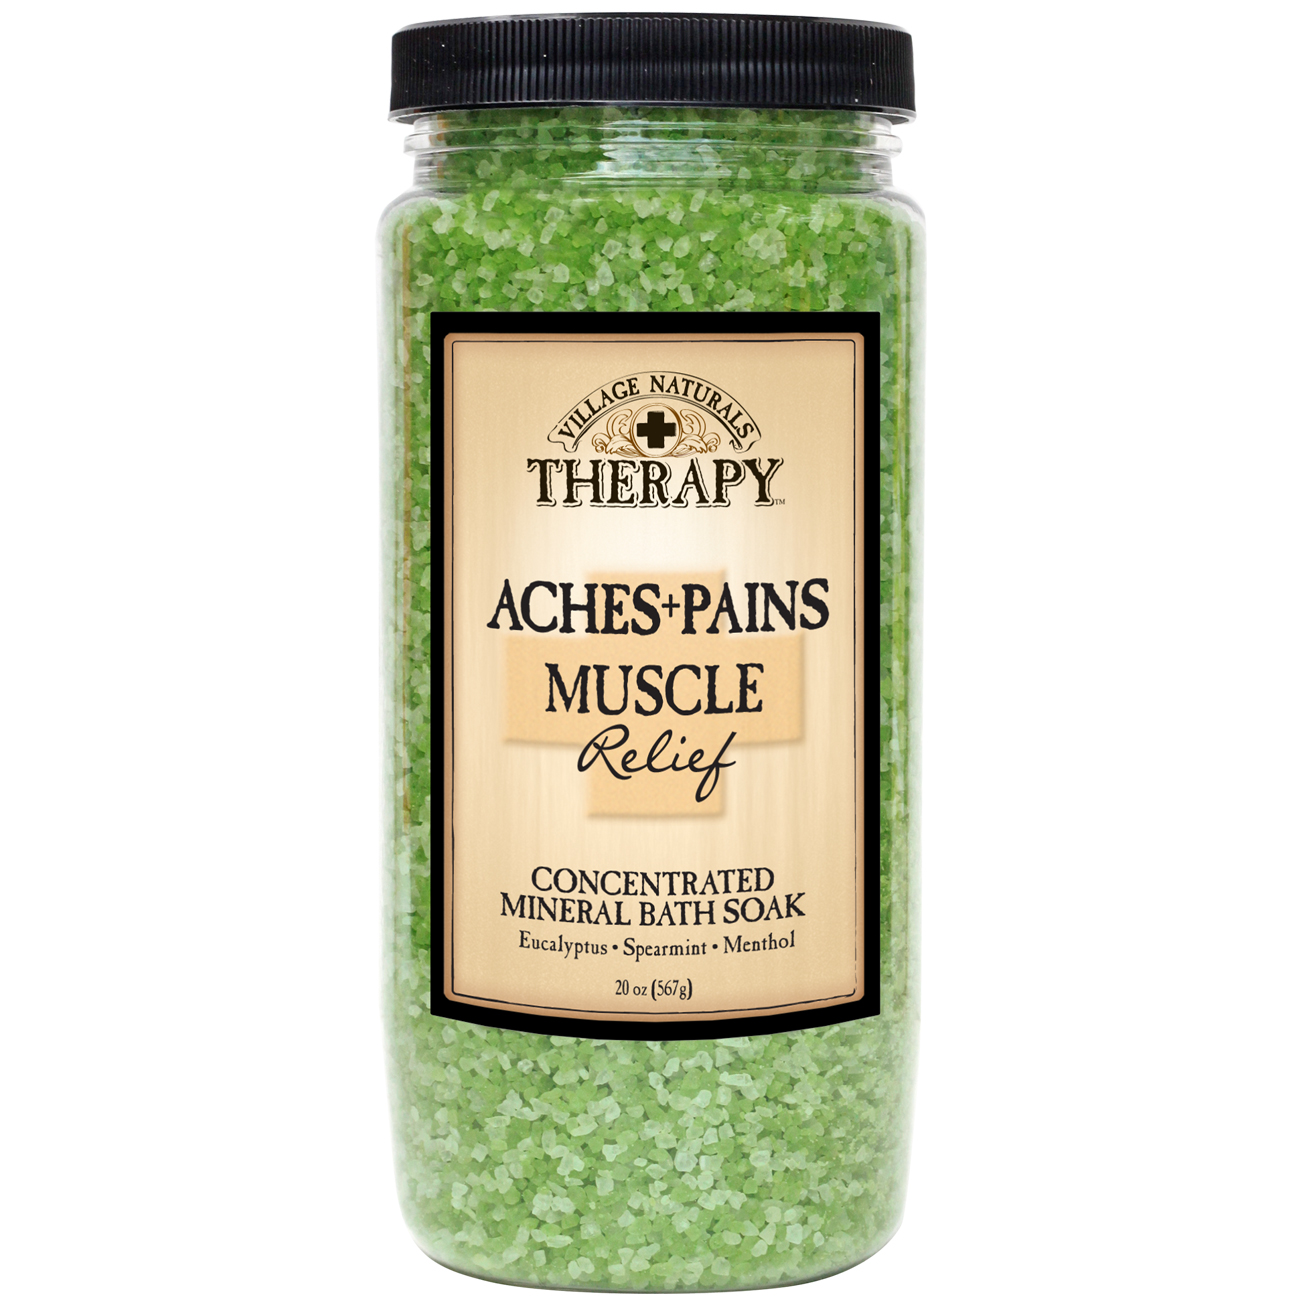 Villiage Naturals Therapy Aches and Pains Muscle Soak, 20 oz (567 g)